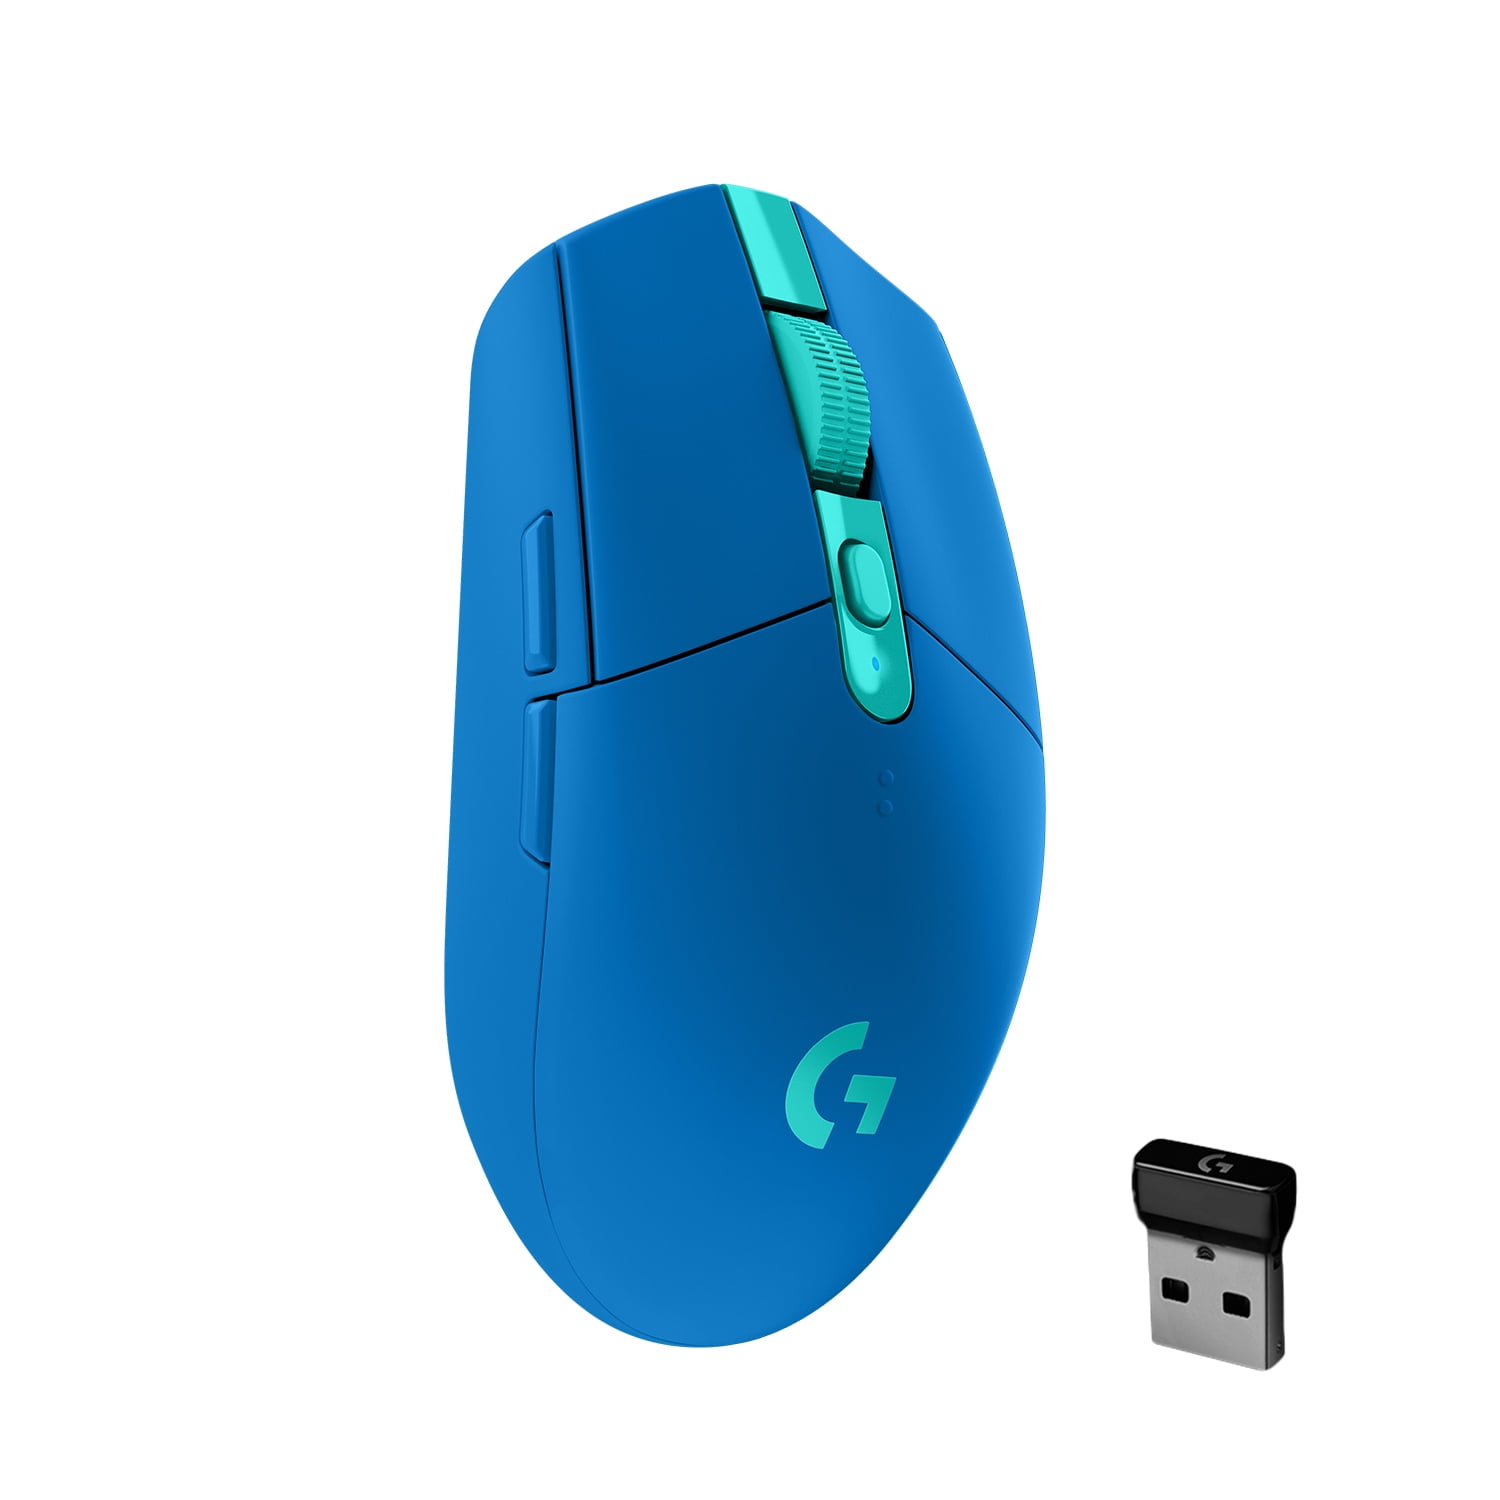 Picture of Logitech 910-006012 G305 LightSpeed Wireless Gaming Mouse, Blue